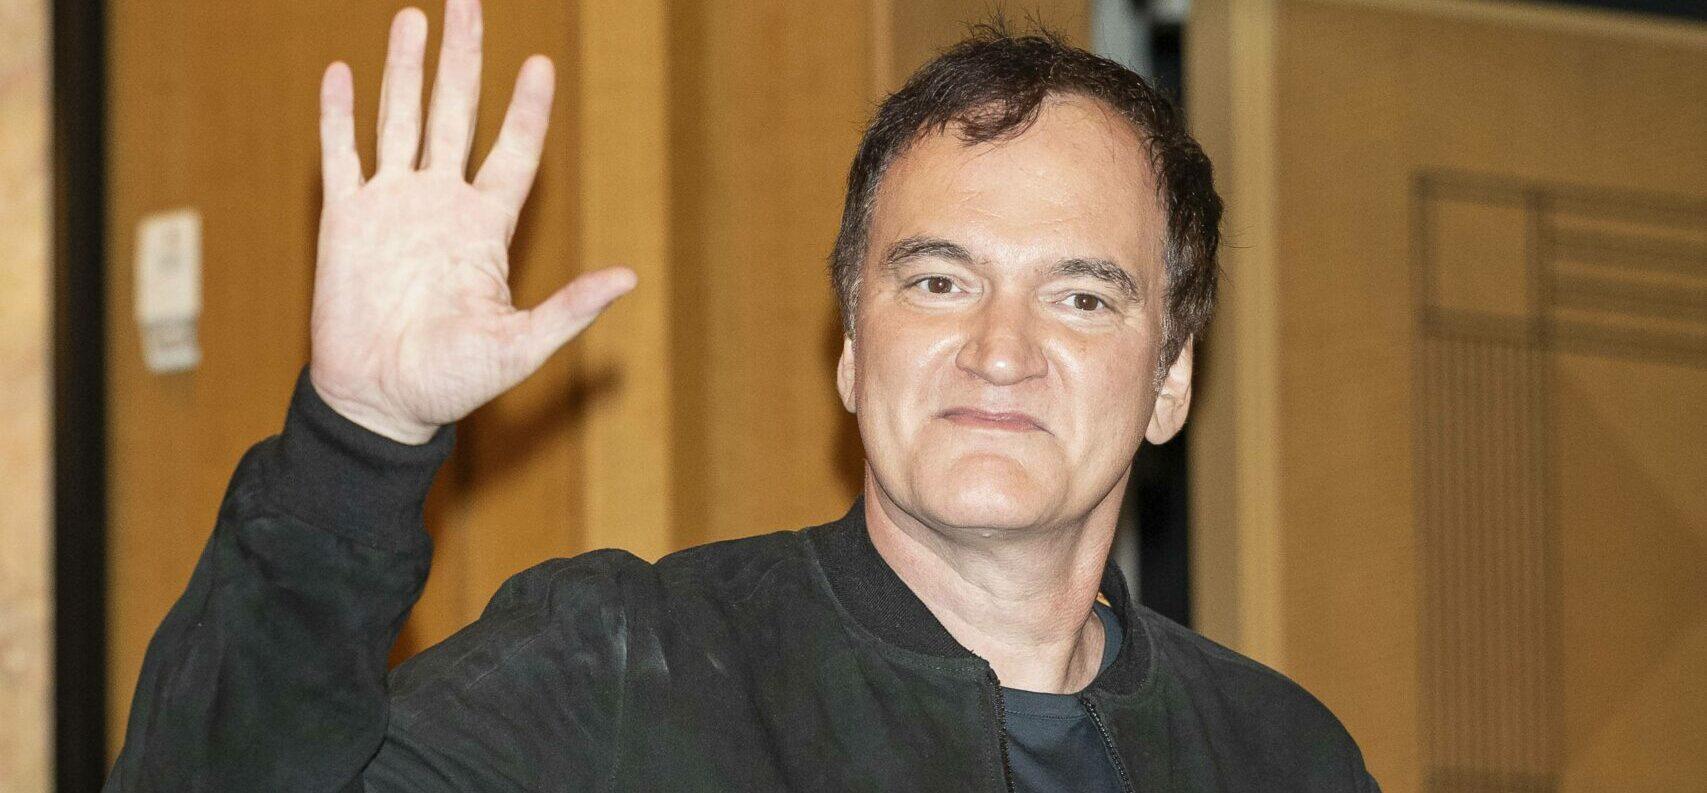 Quentin Tarantino’s Mom DEFENDS His Decision To Not Help Her Financially